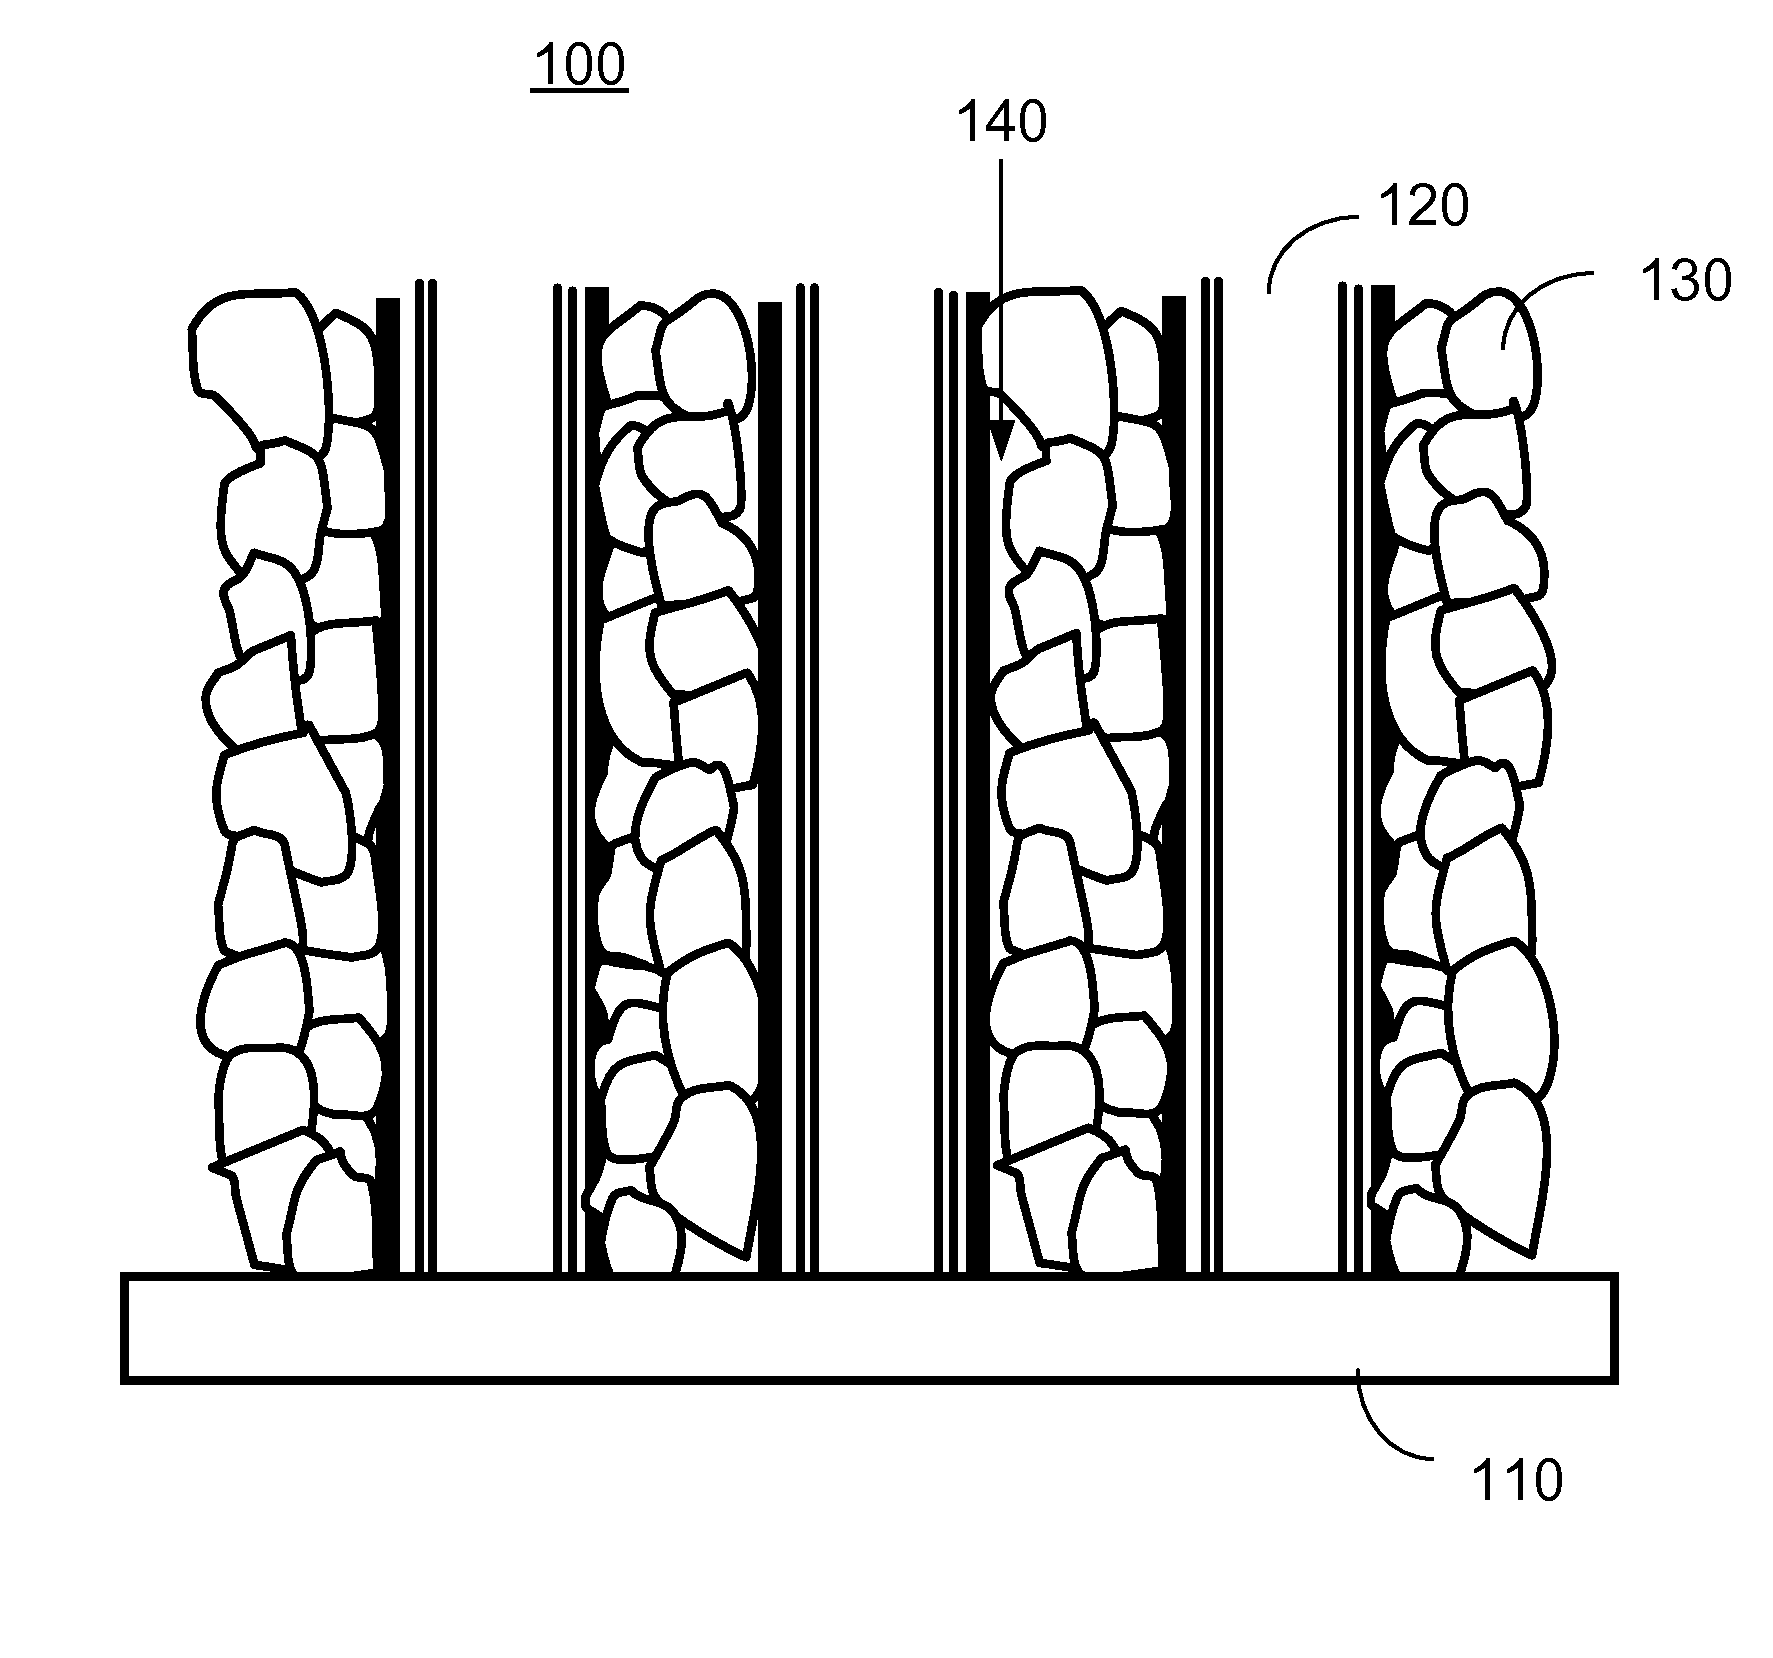 Electrode useable in electrochemical cell and method of making same